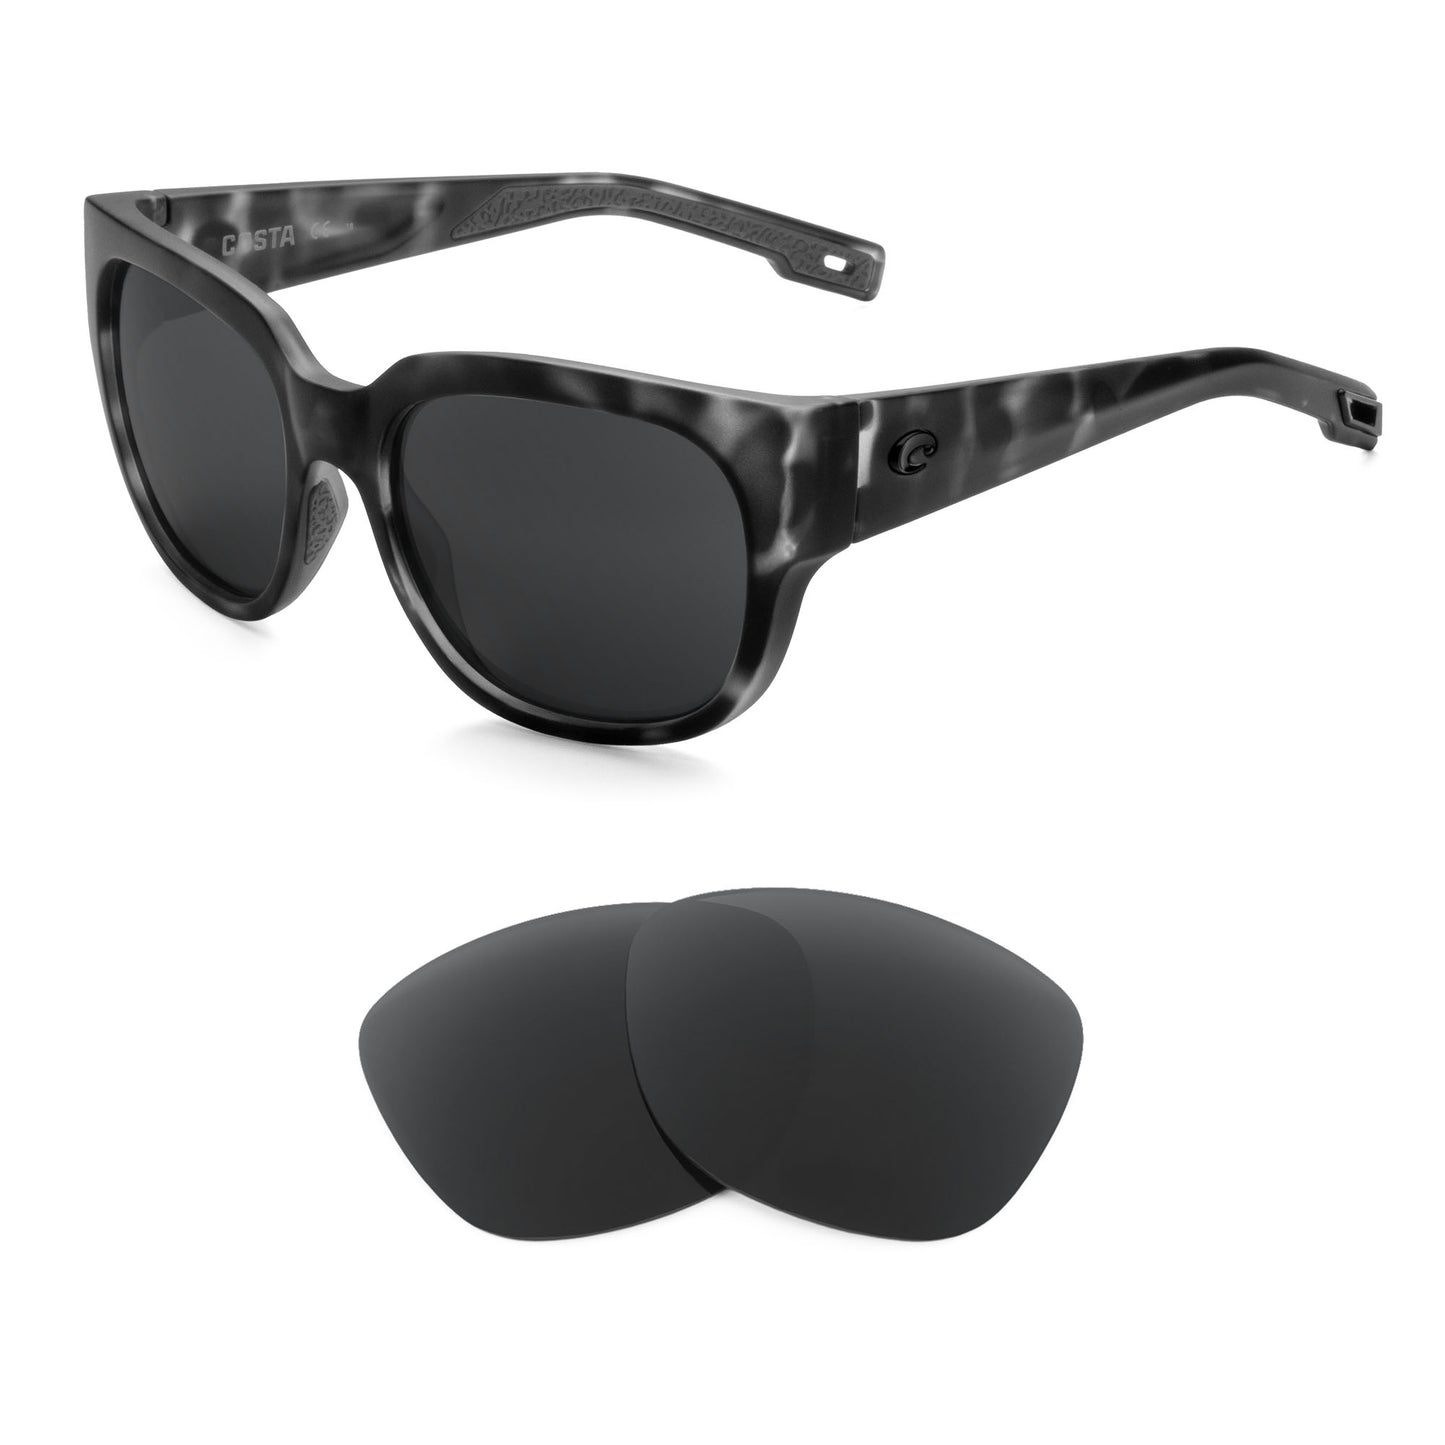 Costa Waterwoman sunglasses with replacement lenses